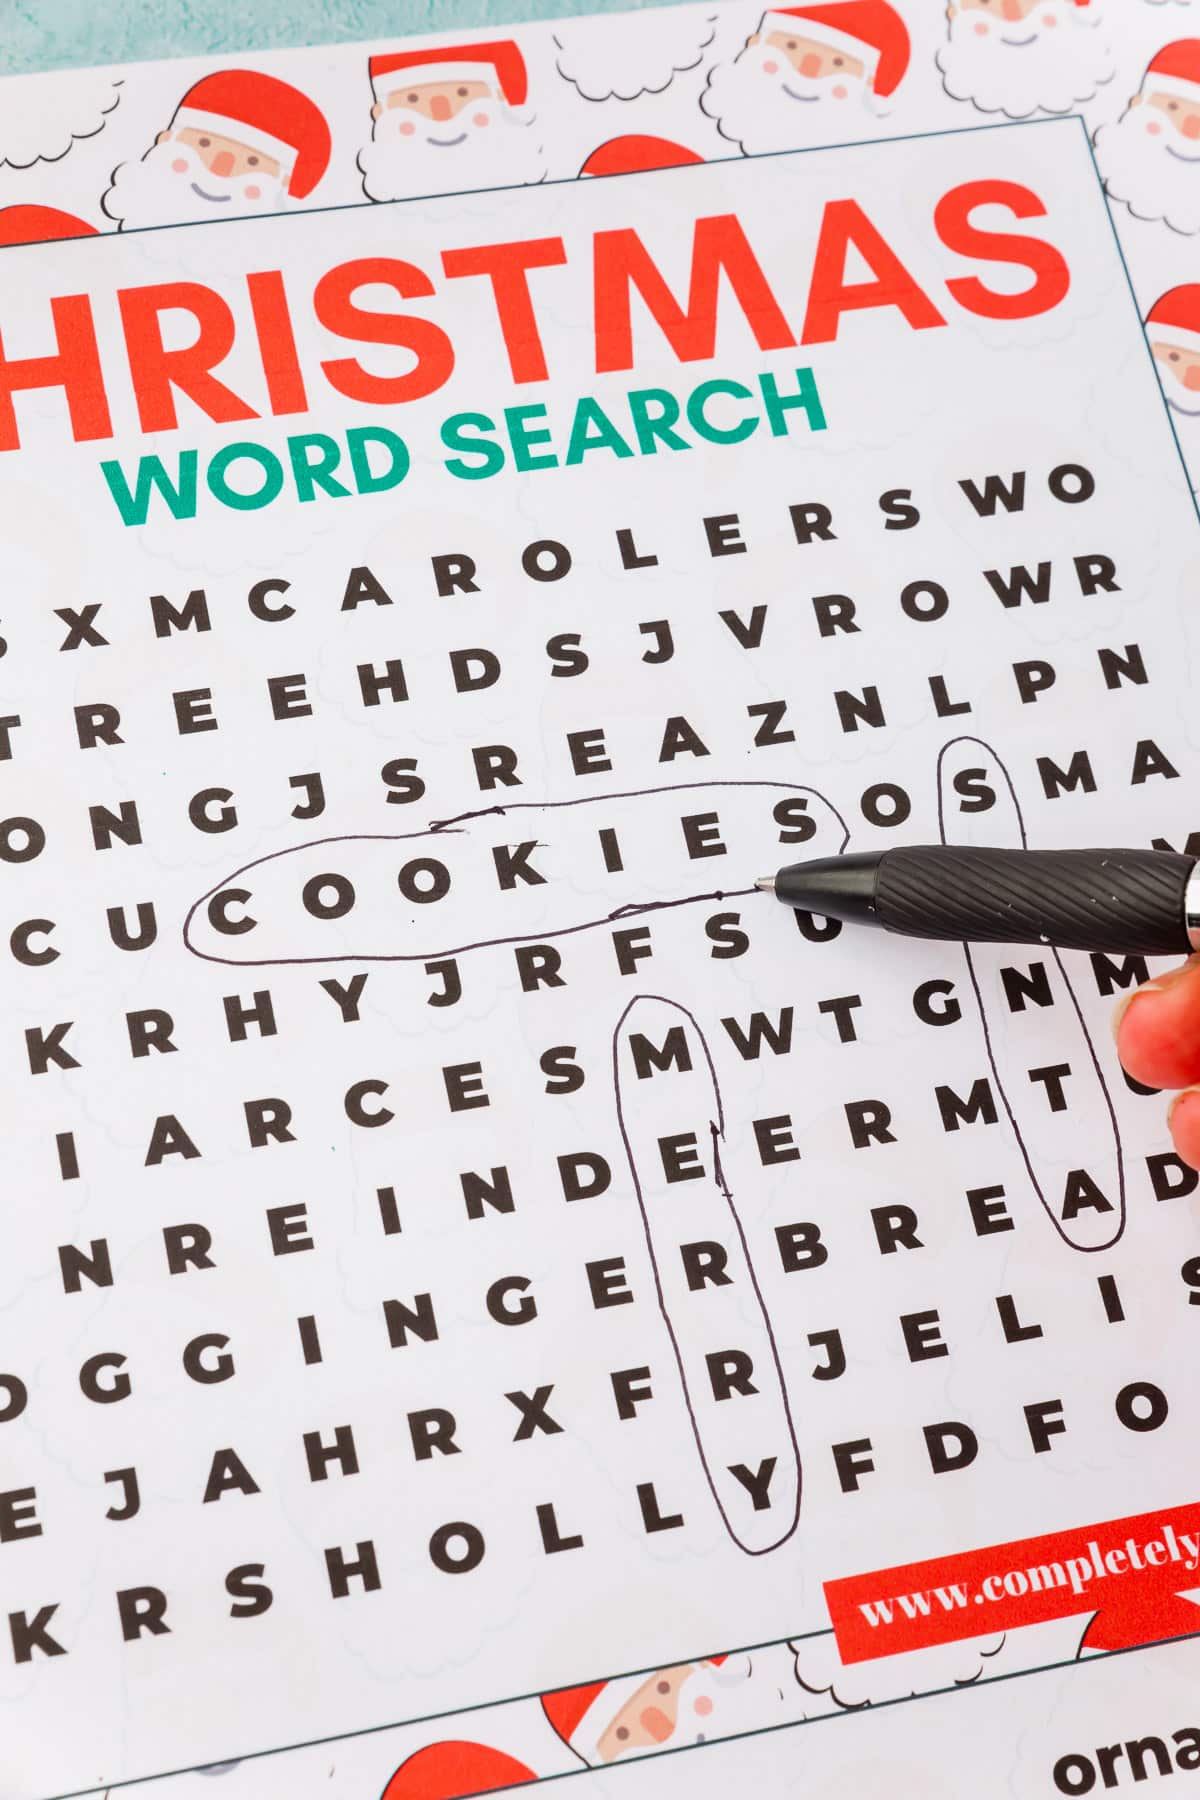 A hand circling the word "cookies" on a Christmas word search printable.